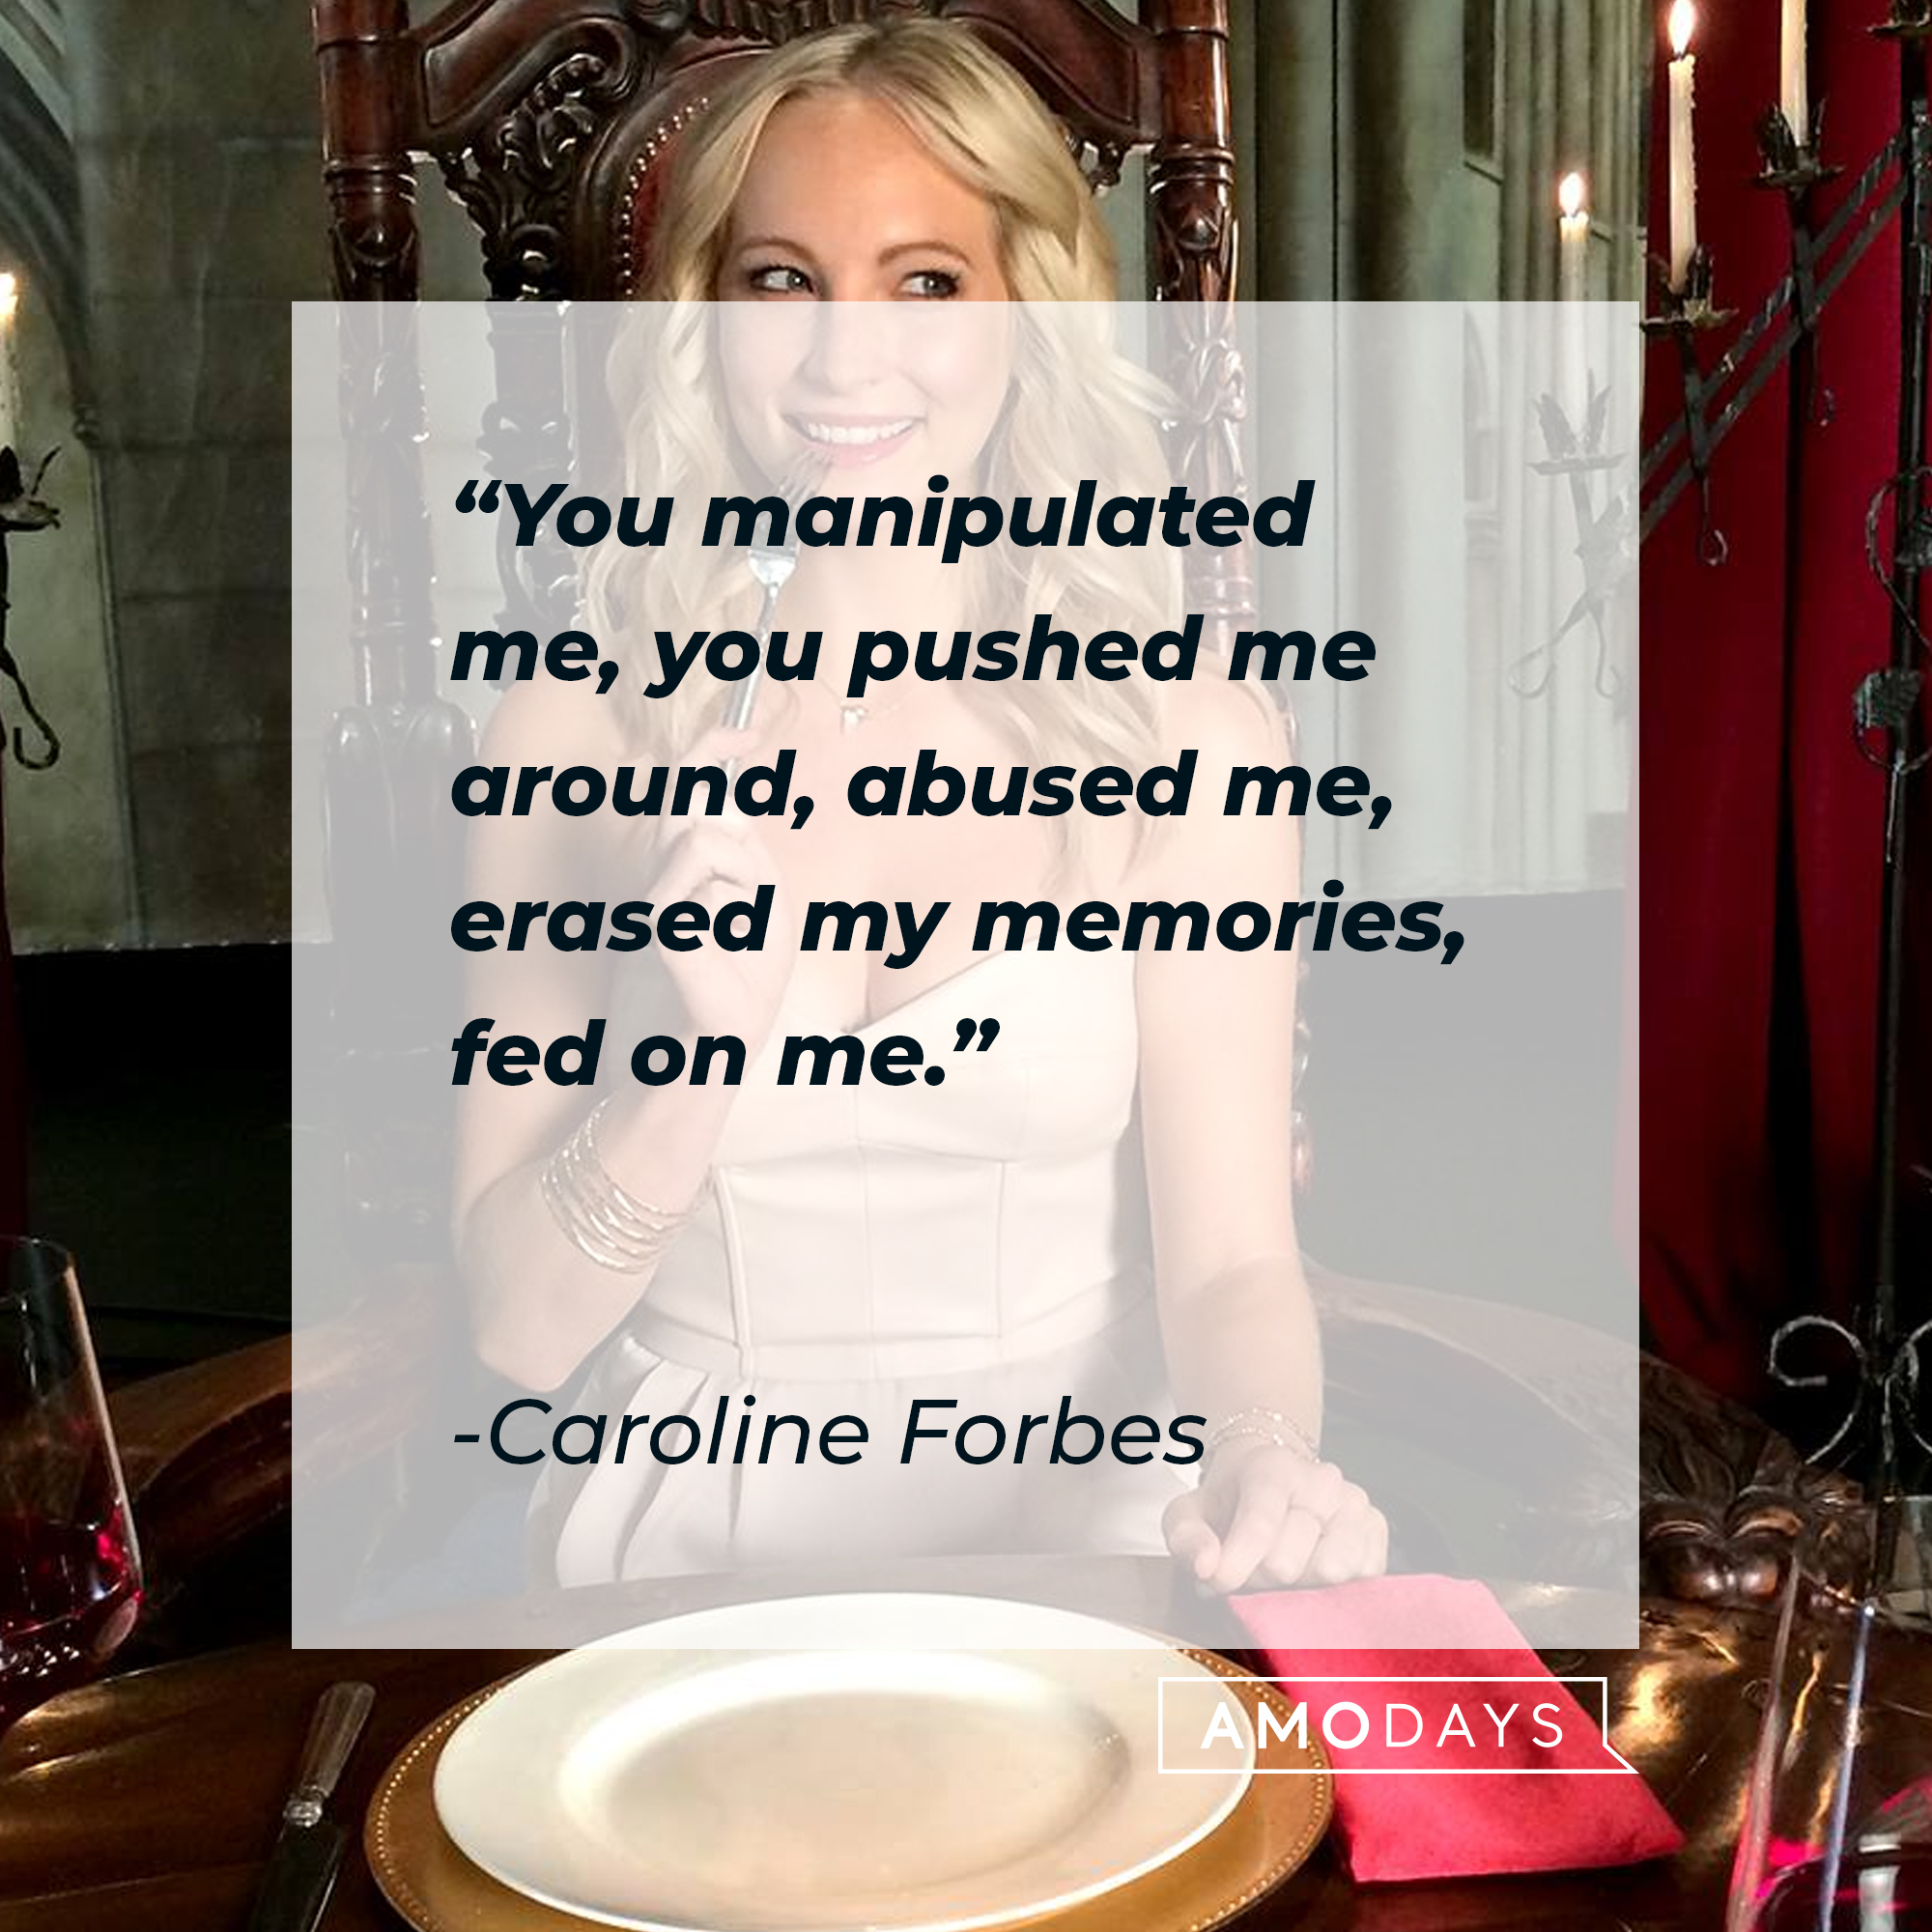 Caroline Forbes' quote: "You manipulated me, you pushed me around, abused me, erased my memories, fed on me." | Source: Facebook.com/thevampirediaries